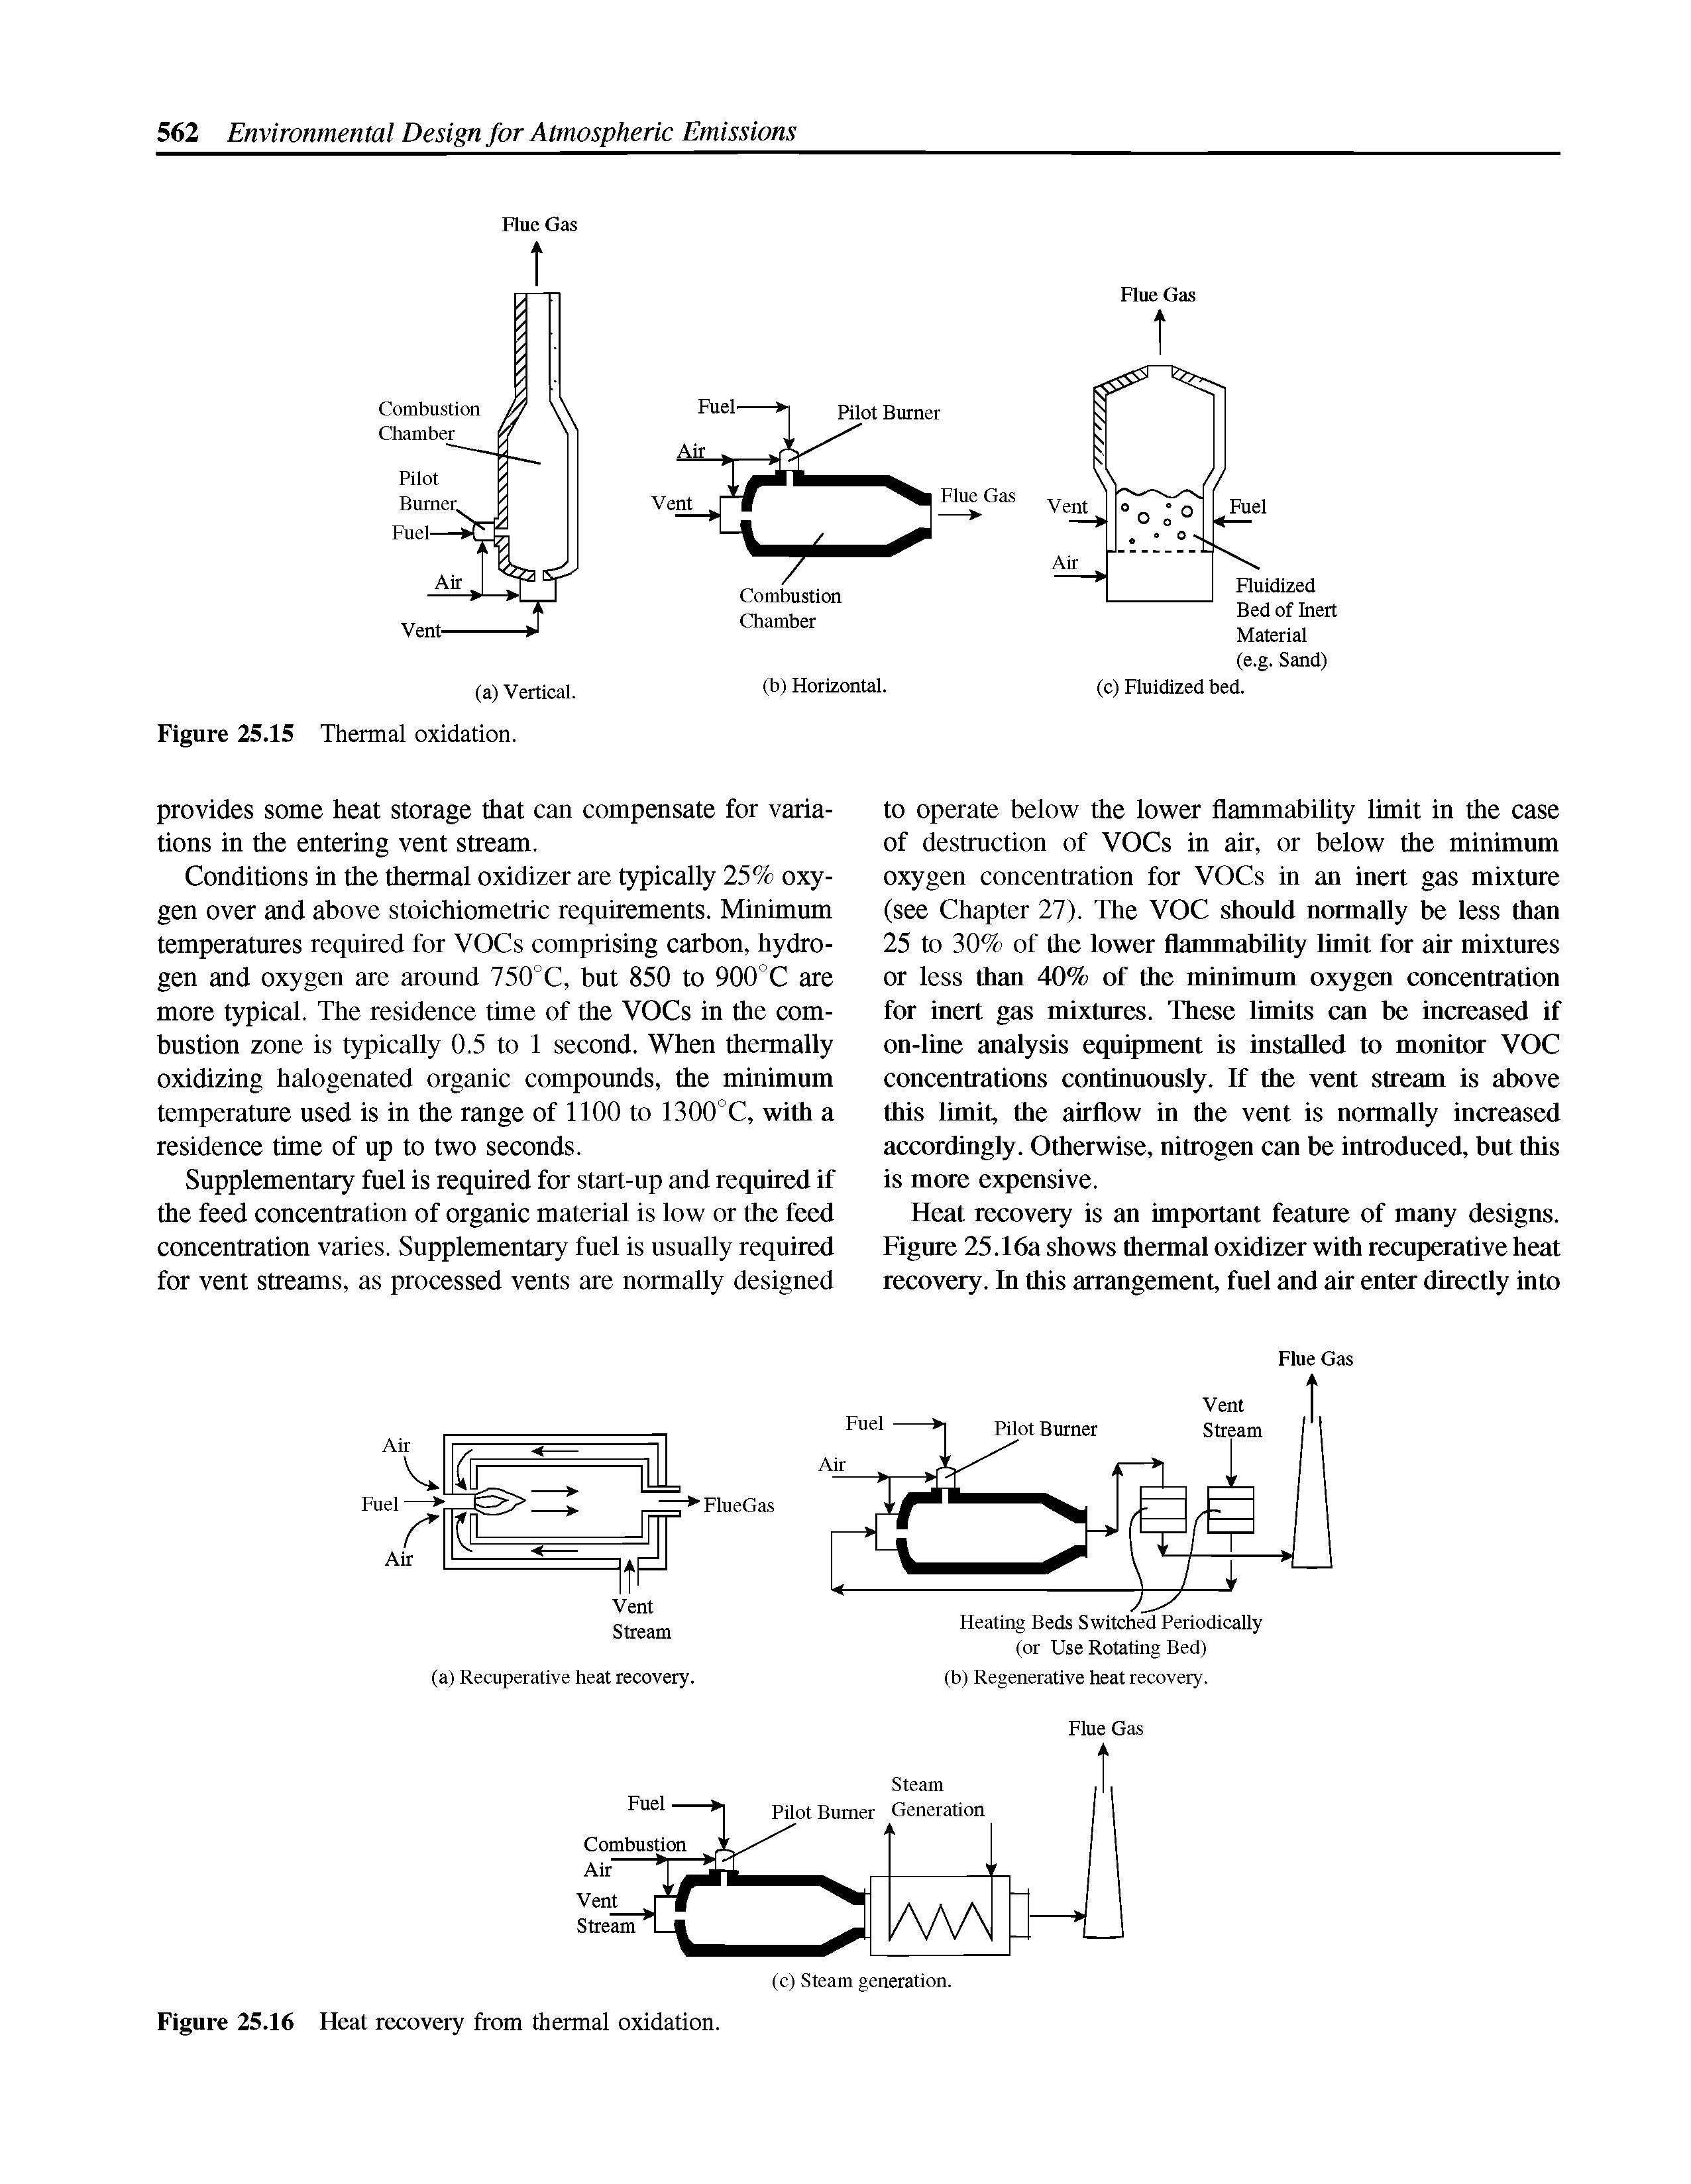 Figure 25.16 Heat recovery from thermal oxidation.